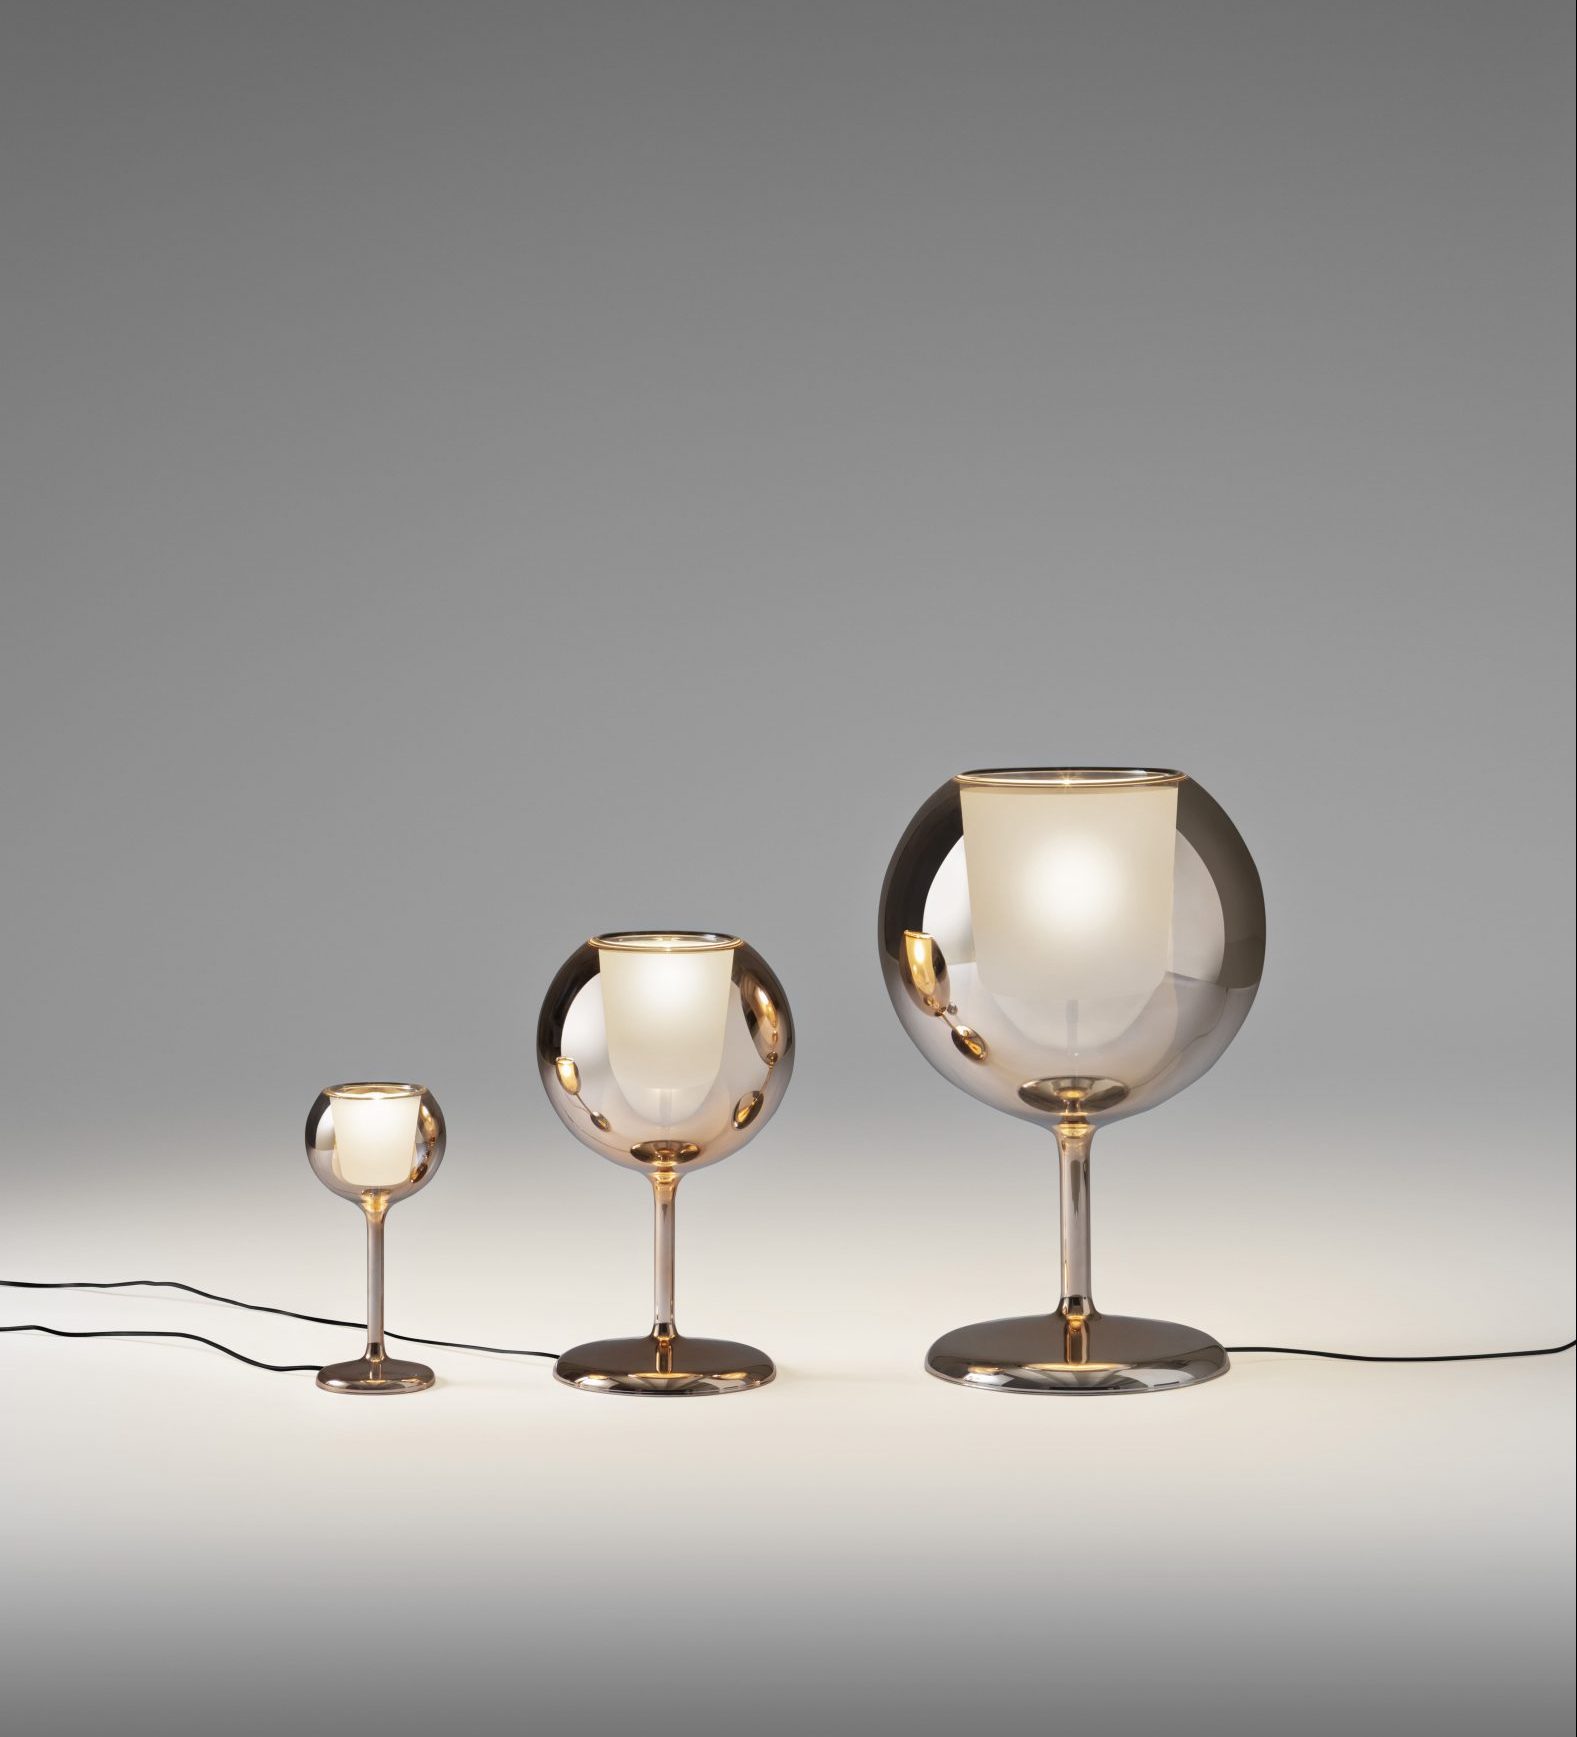 A light with a glass sphere